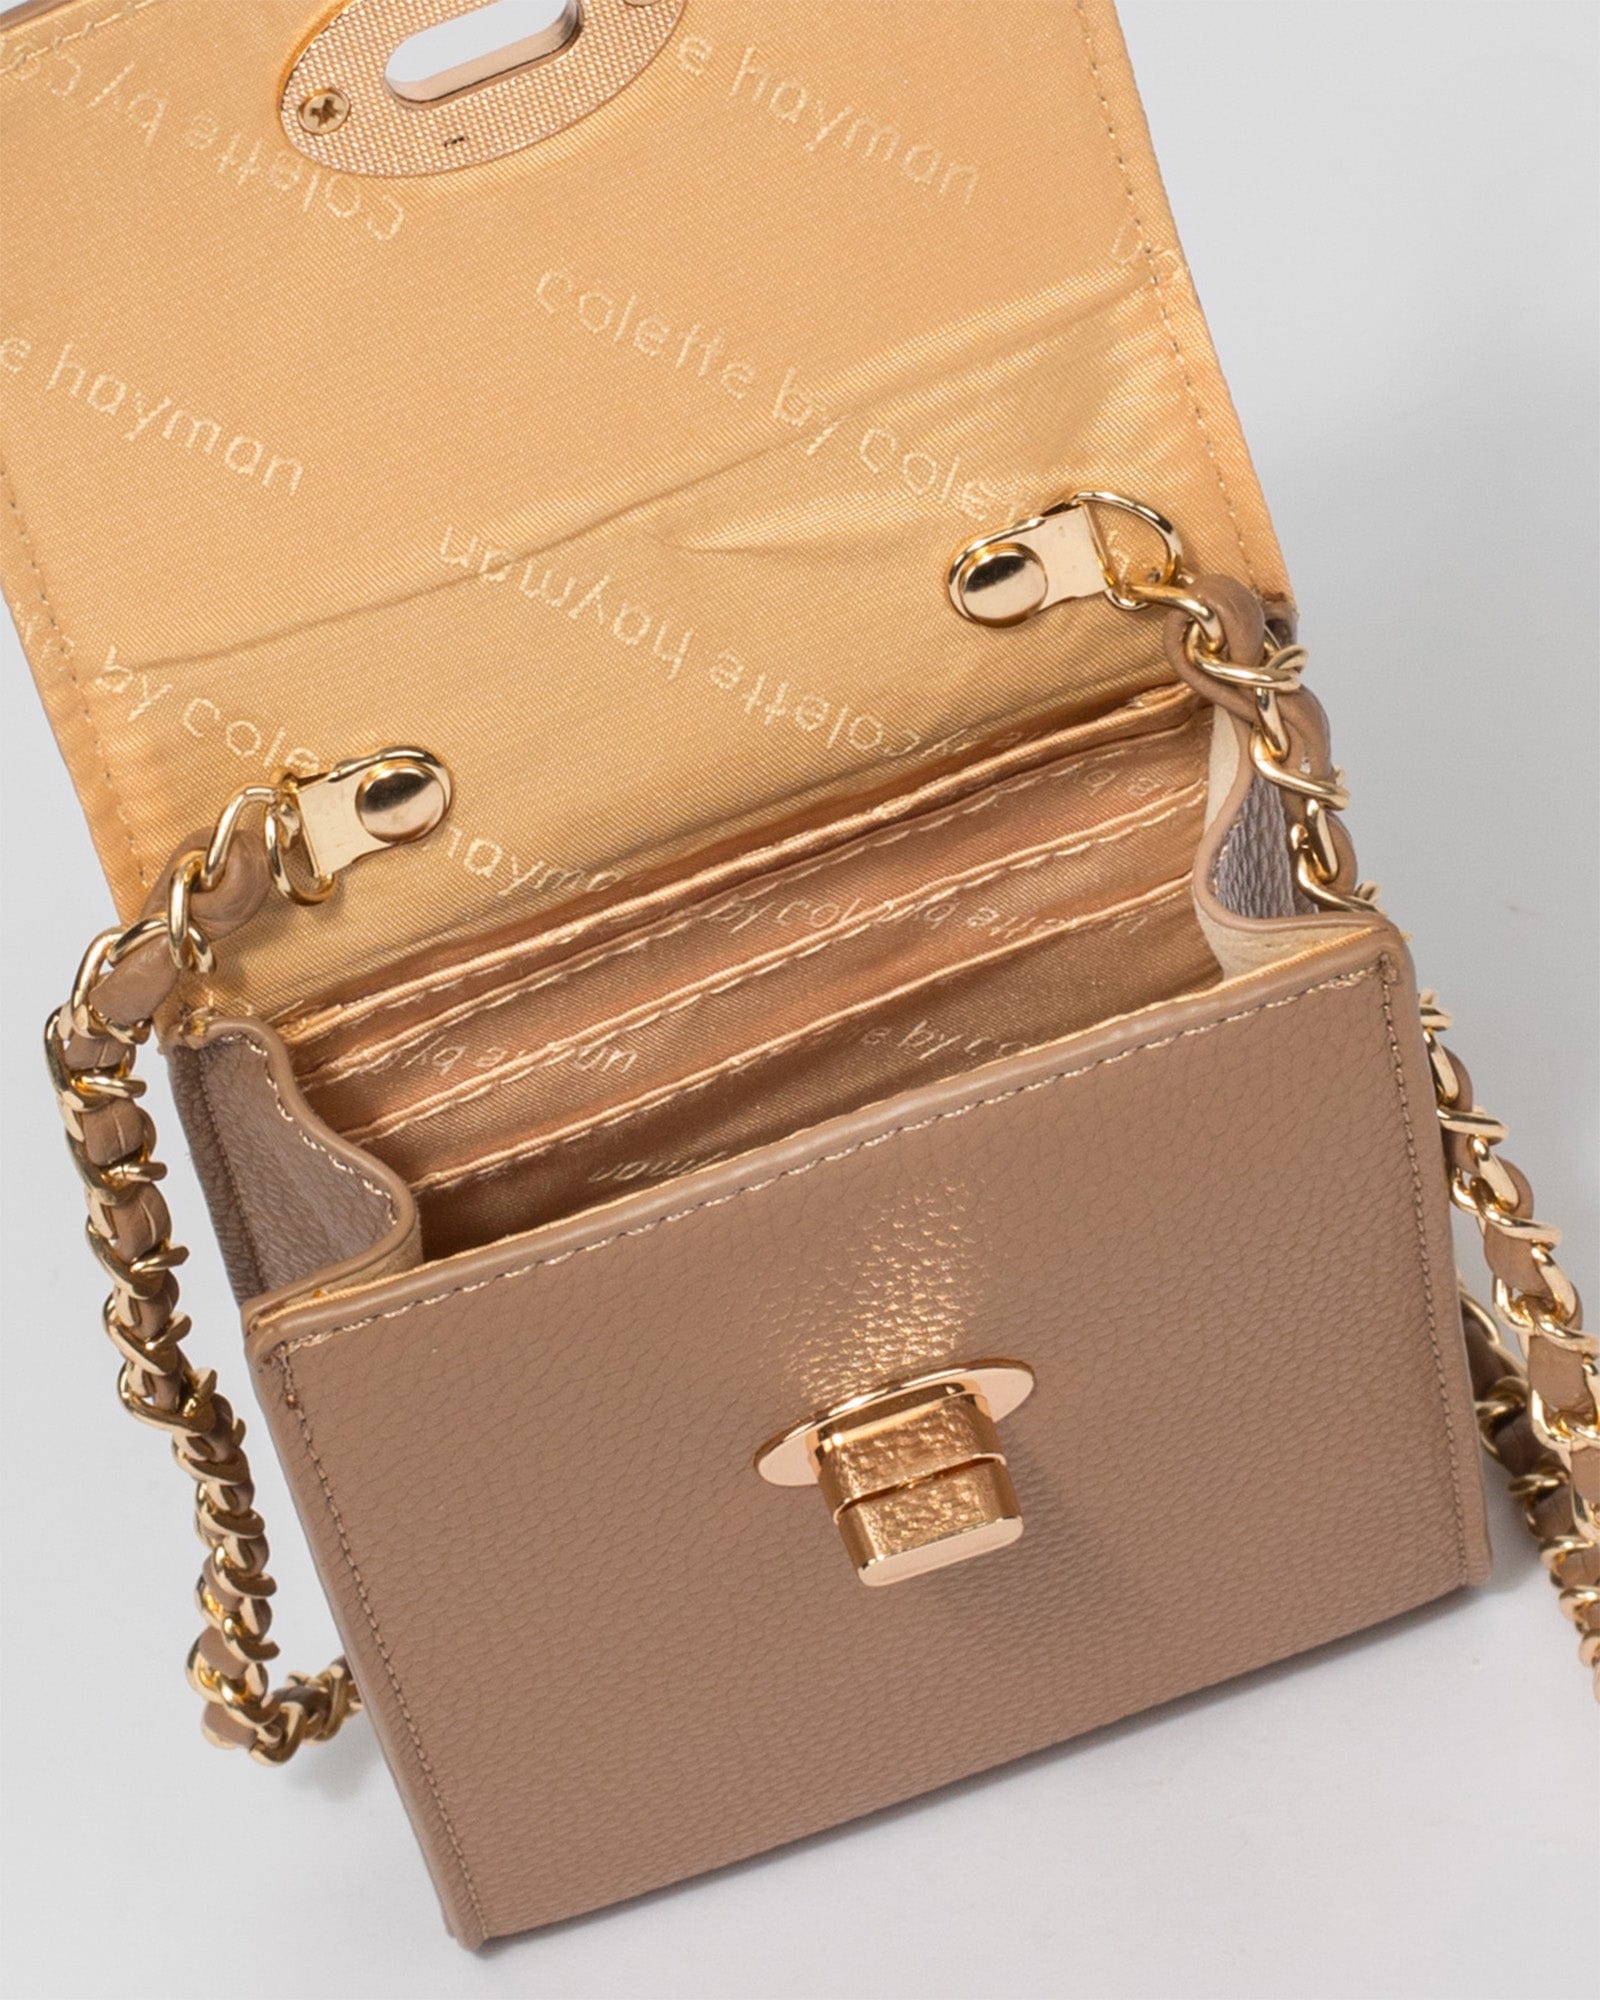 Colette Hayman Gorgeous Diana Bug Cross Body Bag with Gold Tone Chain  Shoulder Strap & Gold Tone Front Bee Metal Alloy Motif Detail - RRP $49.99  (s)